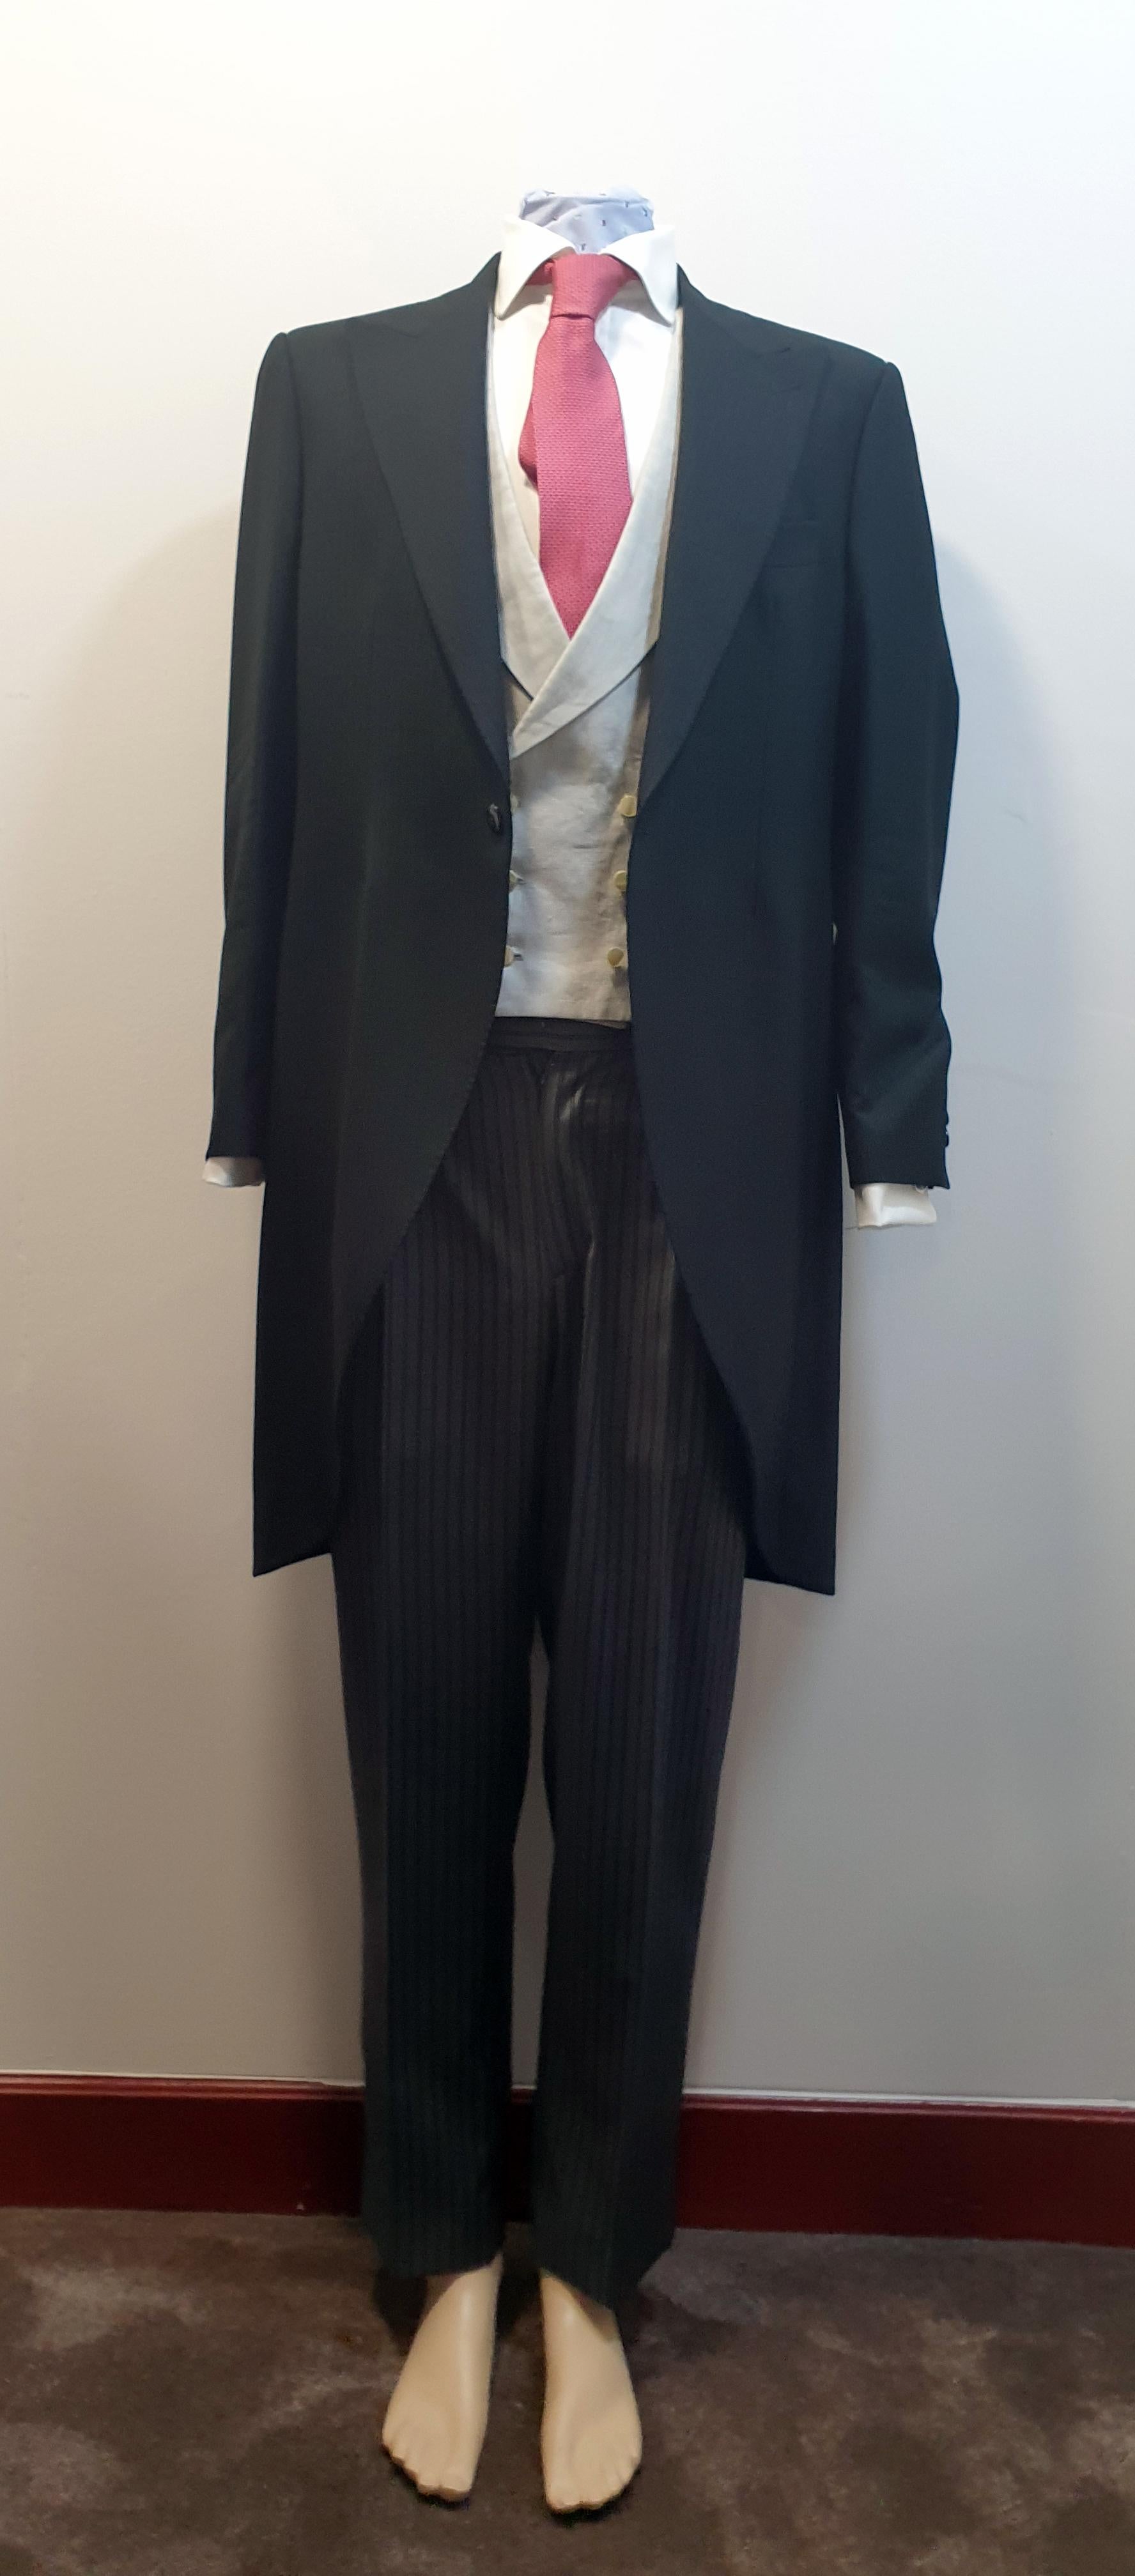 Bespoke black wedding morning suit by MAN Bilbao
Consisting on long tail chaqué jacket, vest, cuff link blouse, red tie, suspenders  and trousers 
Perfect Condition Only used Once Size 54 Spain

MAN 1924 appears once more in the publication Mr